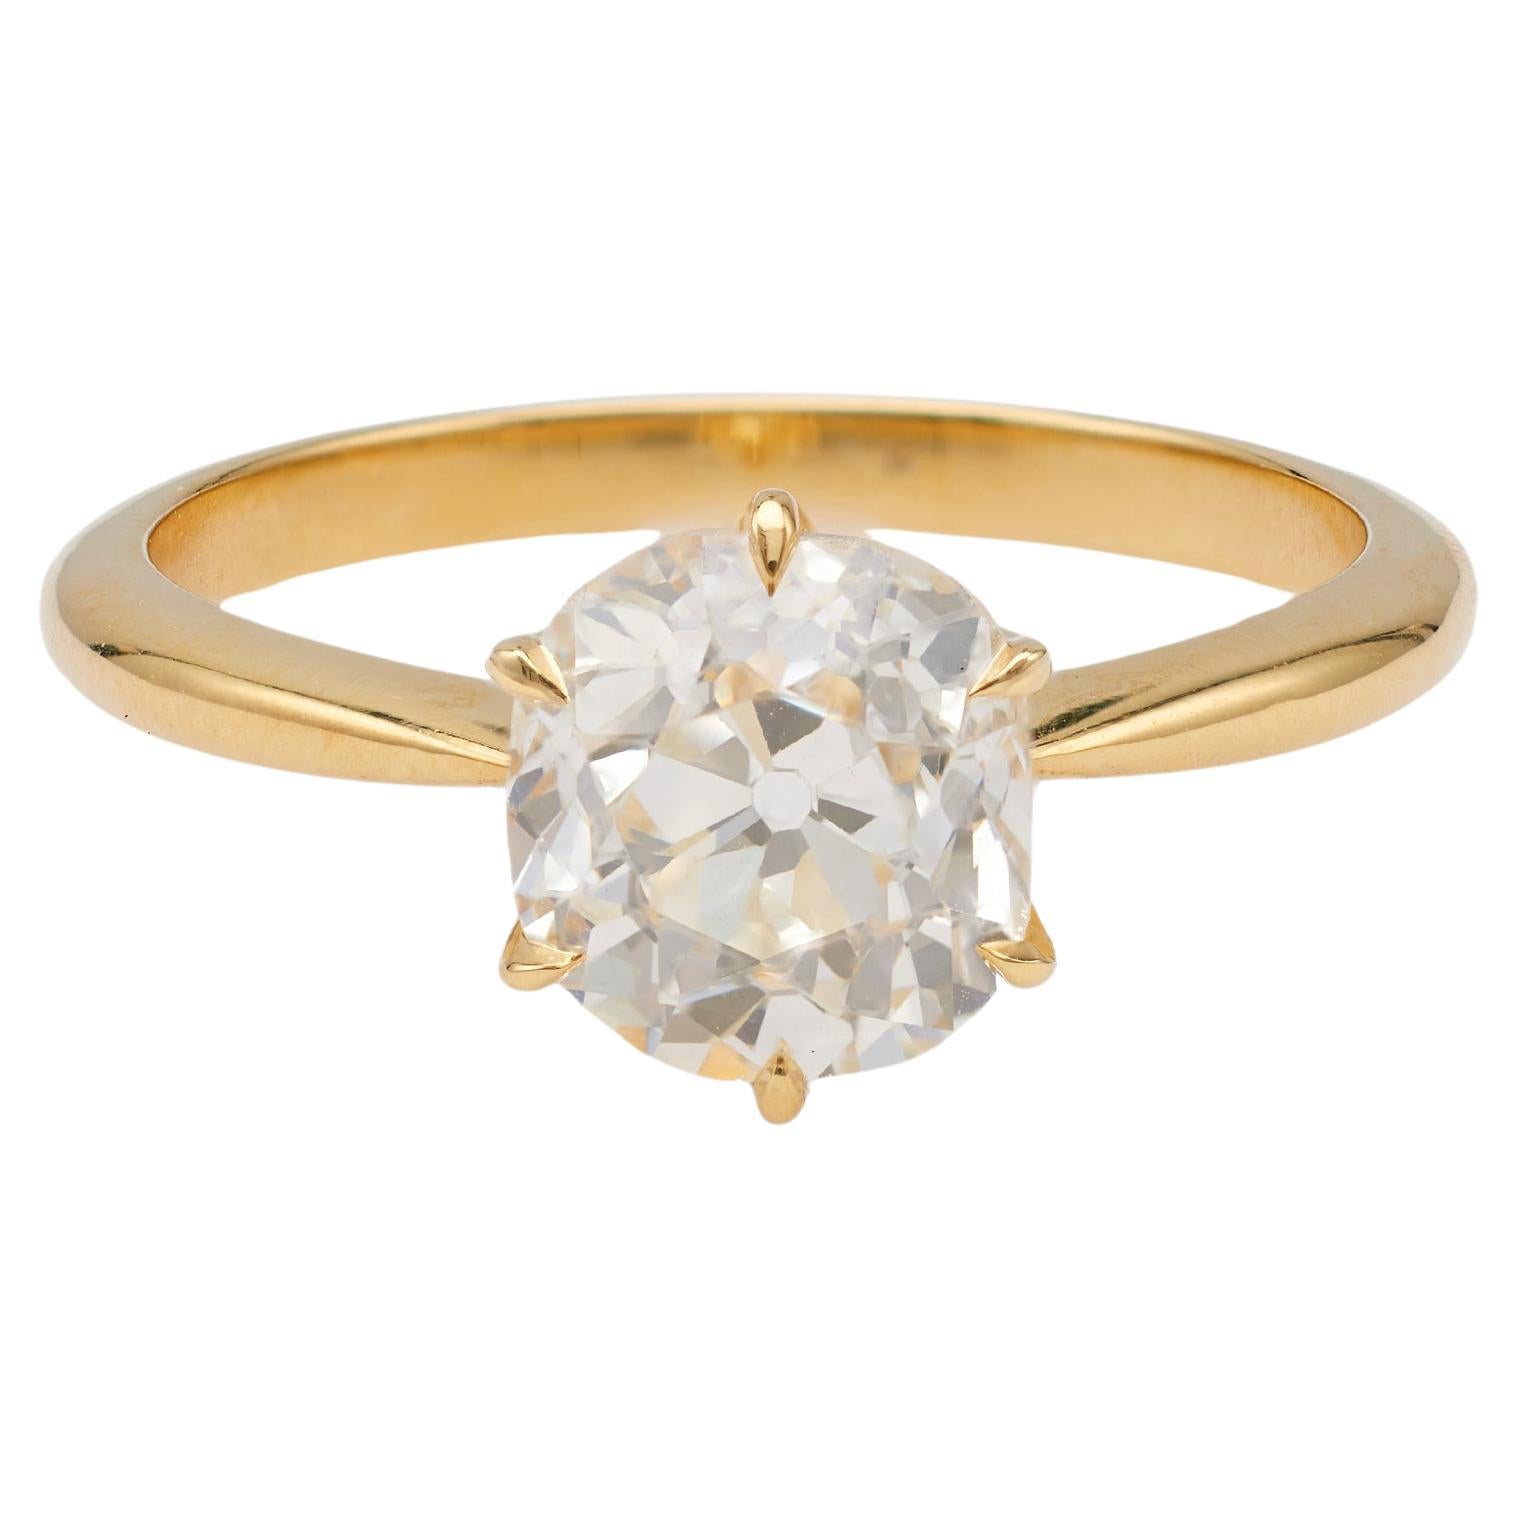 GIA 1.74 Carat Old Mine Cut Diamond 18k Yellow Gold Solitaire Ring